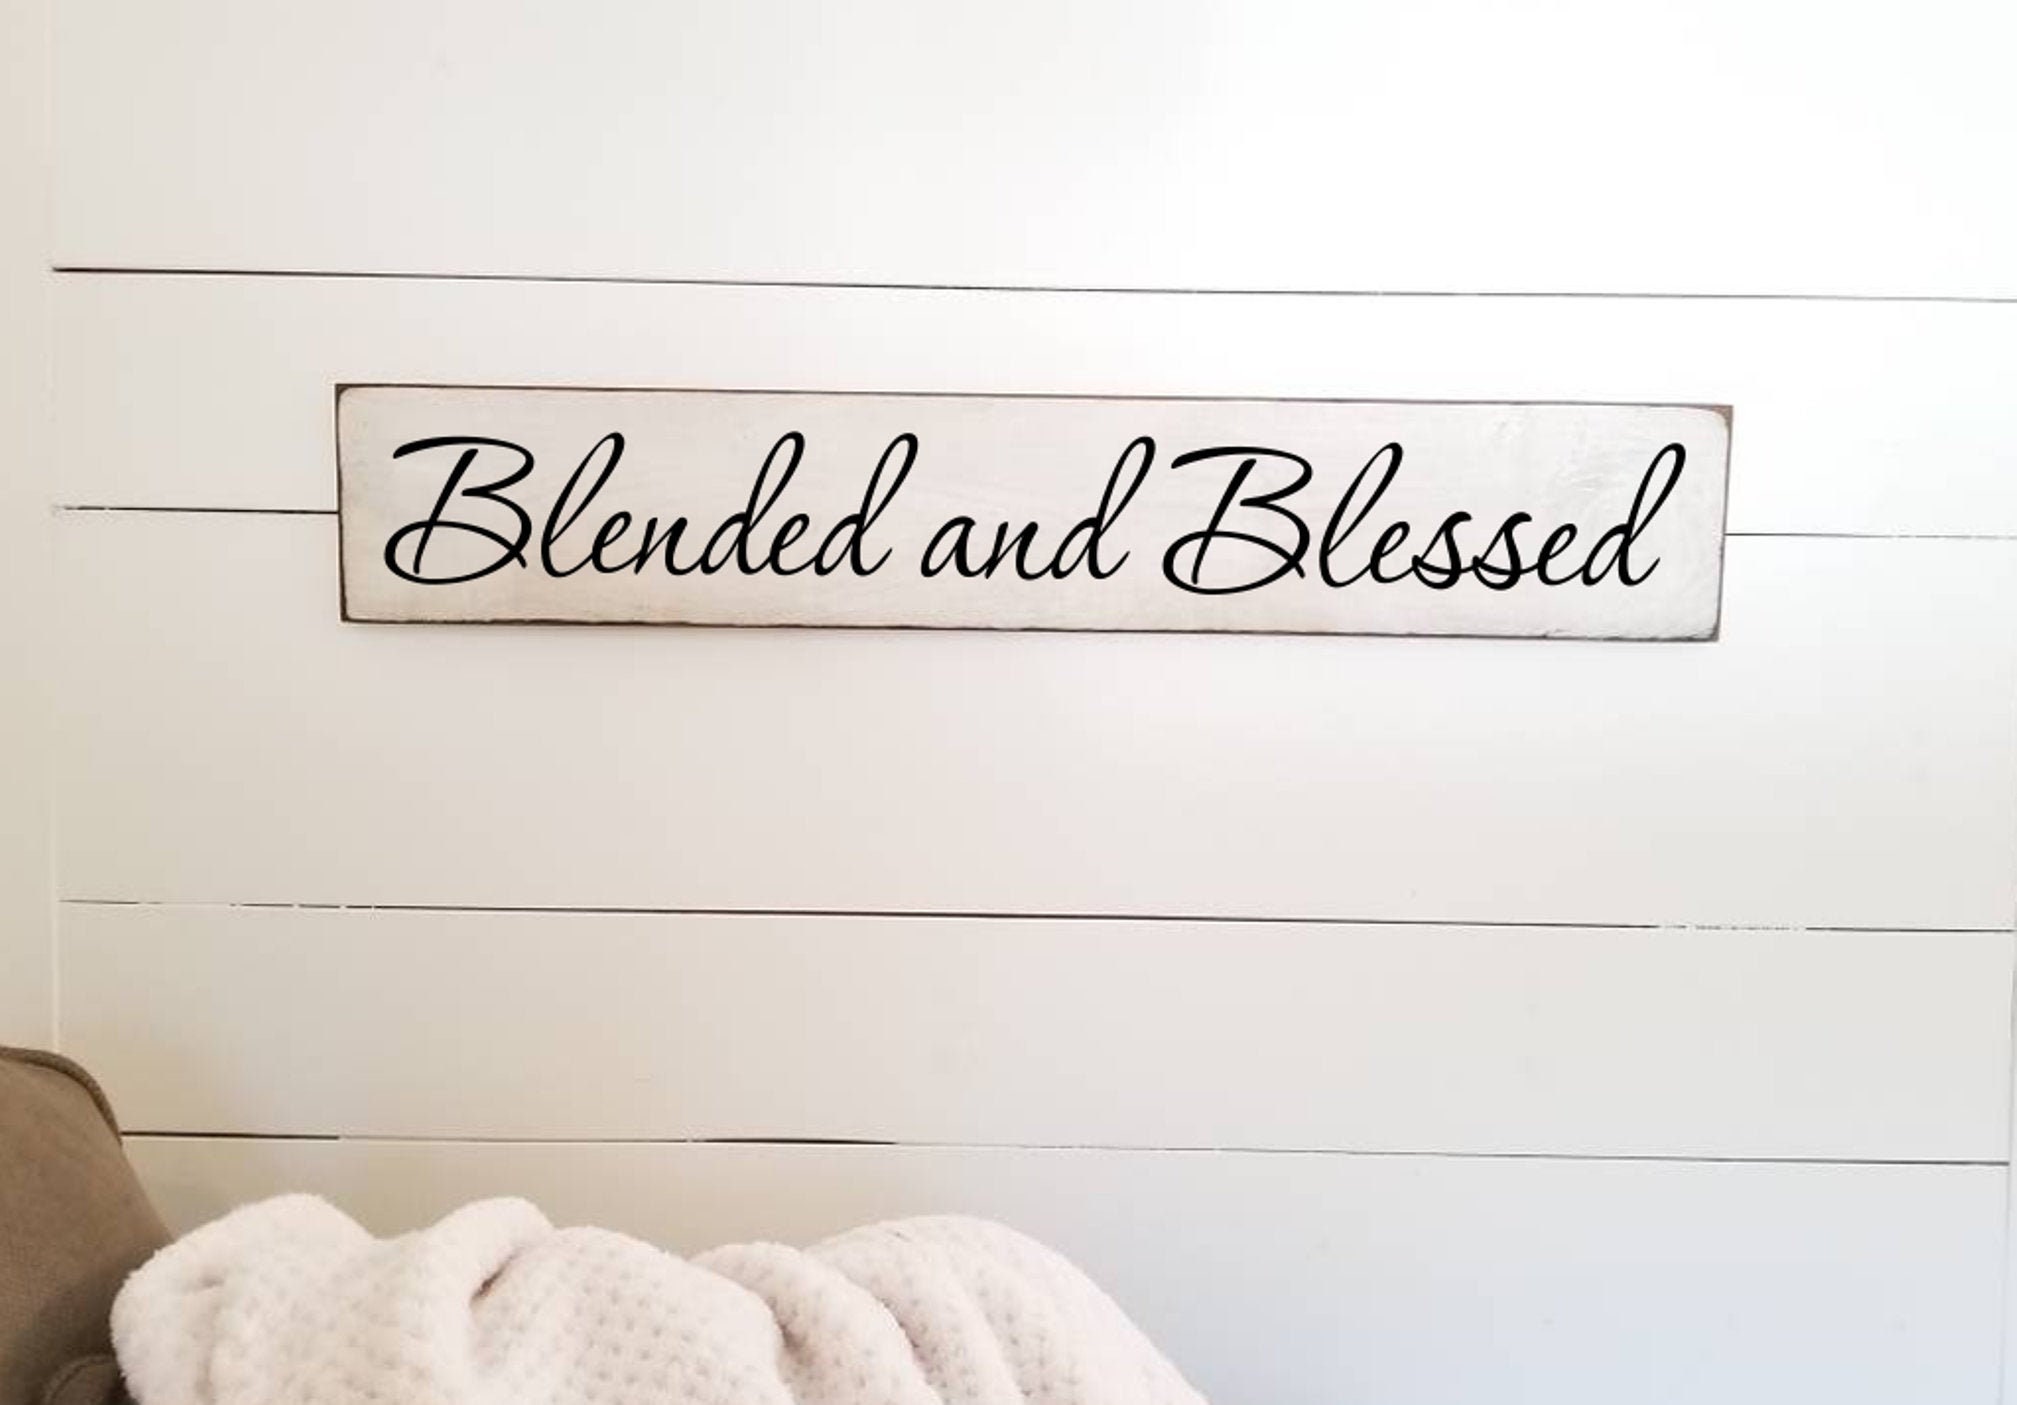 Blended & Blessed Wooden Sign - Farmhouse Dcor White Fixer Upper -Home Rustic Primitive Wood Family Large